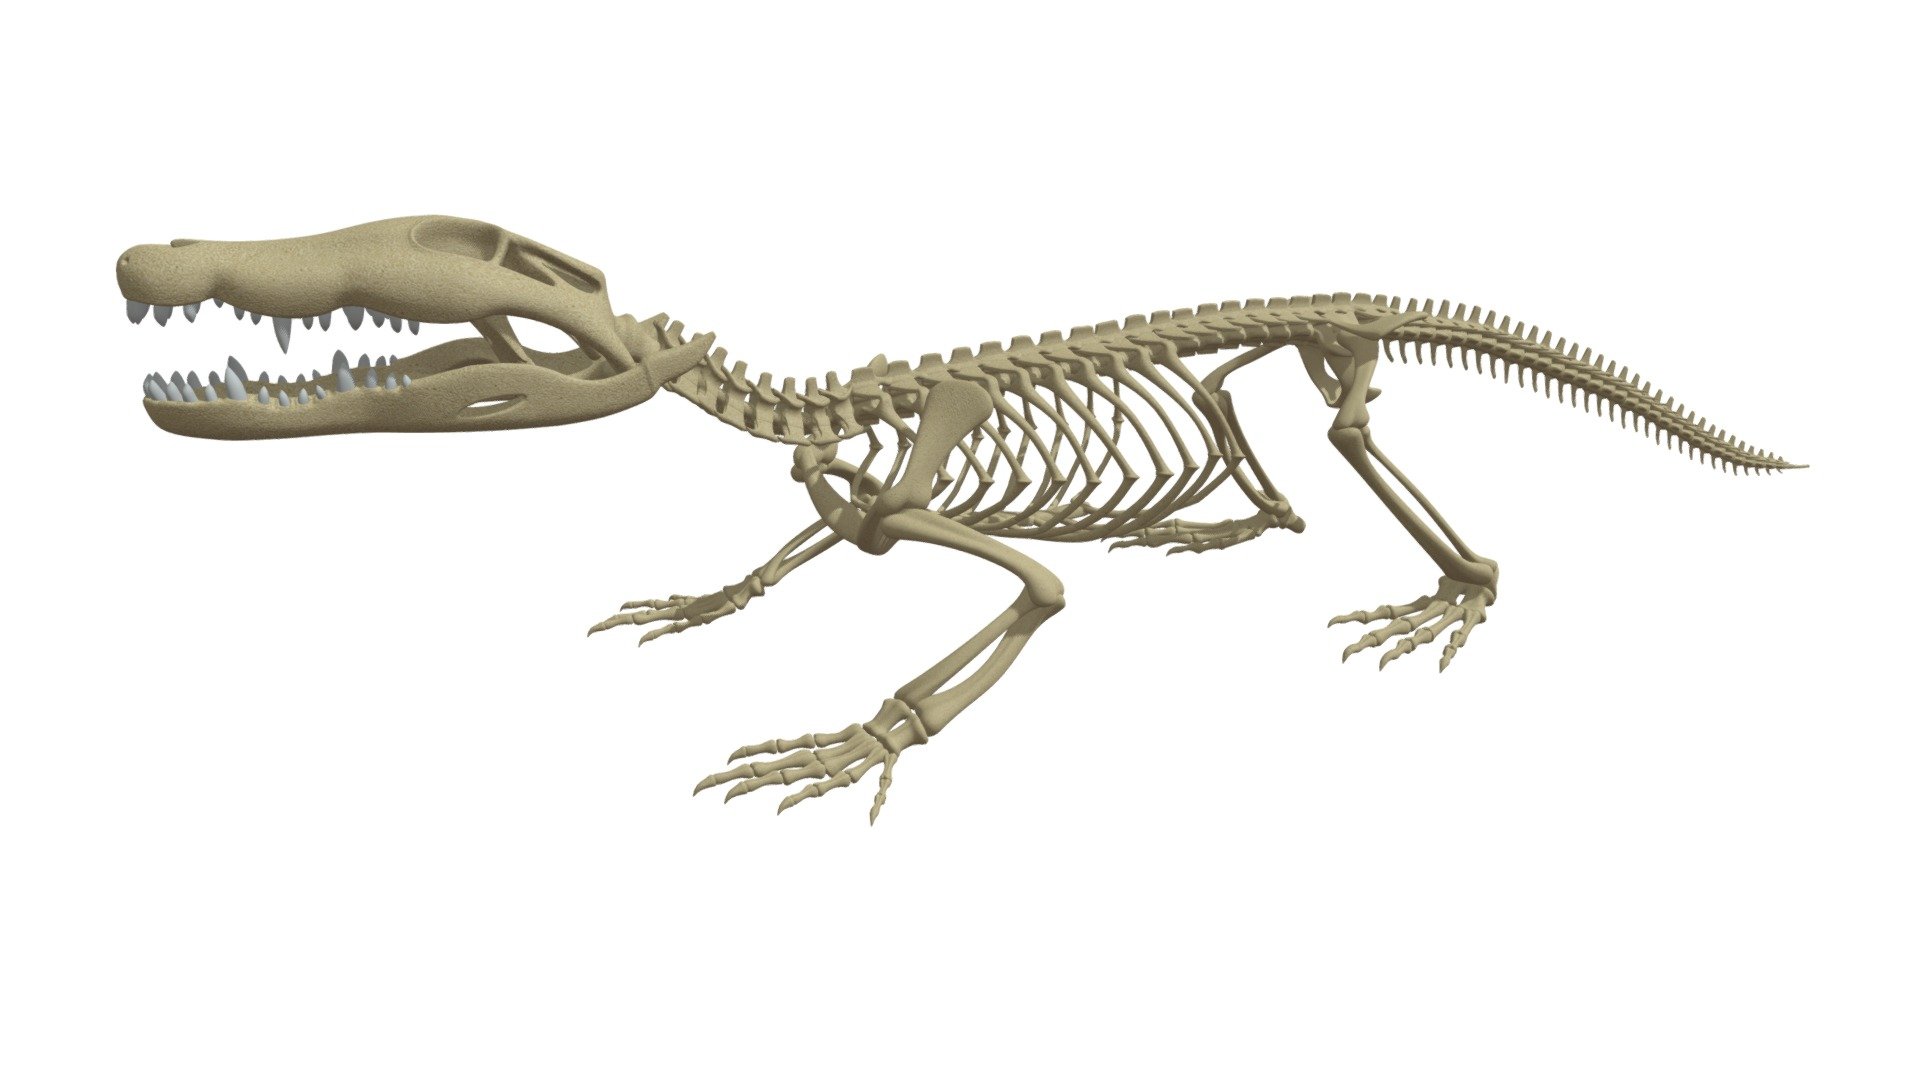 Detailed 3d model of crocodile skeleton.

If you need other 3d formats, please contact us 3d model